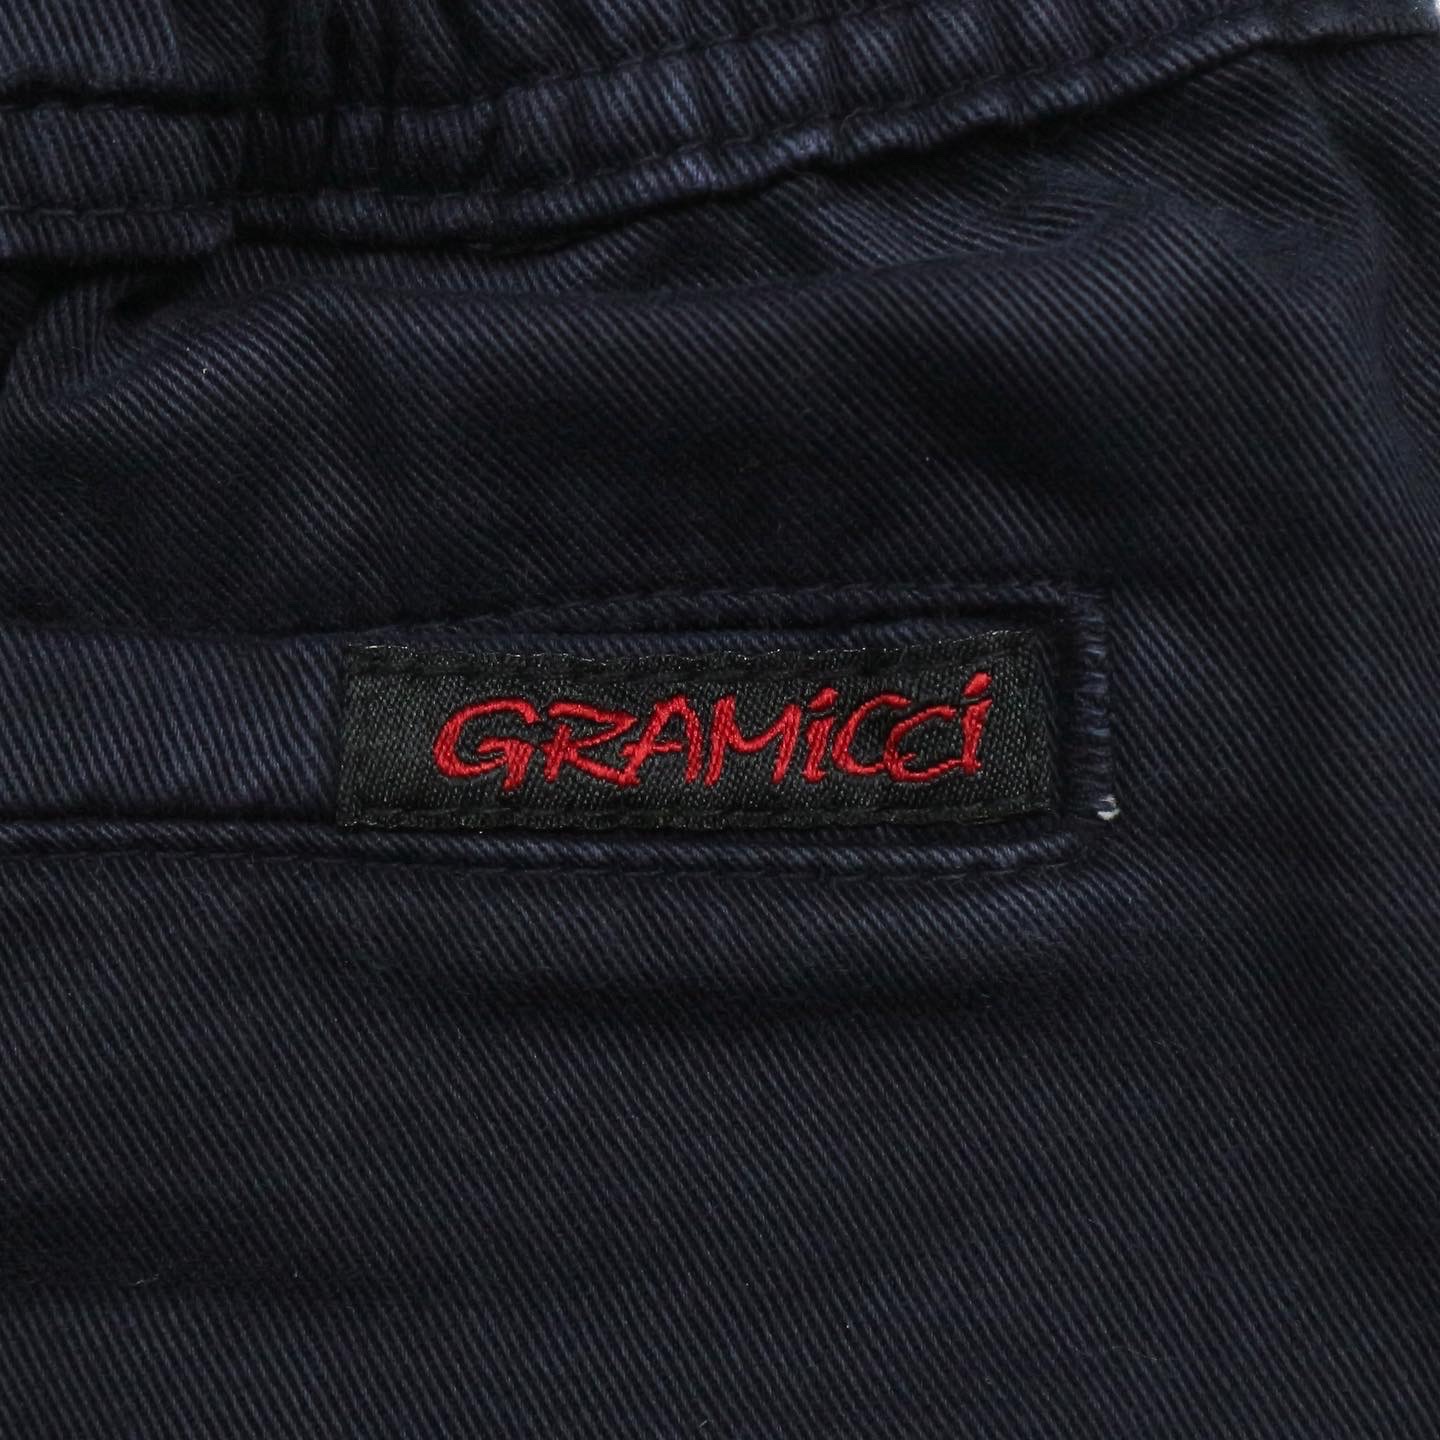 Gramicci Outdoor Shorts Size XS